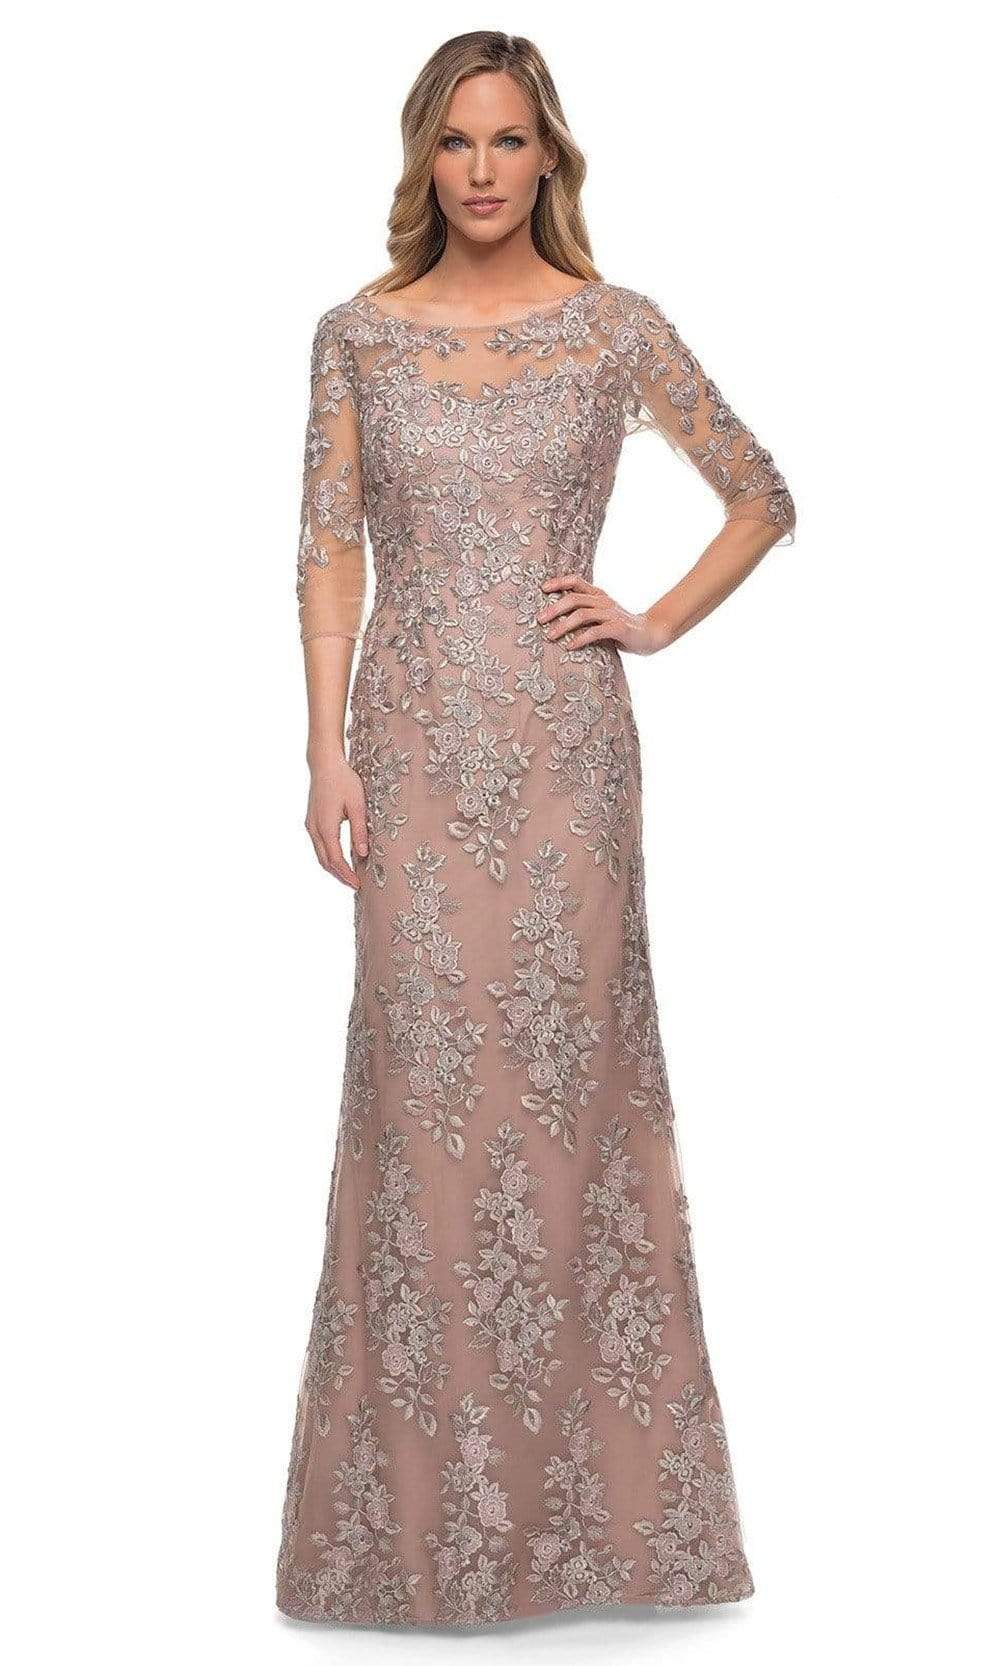 Image of La Femme - 29225 Illusion Embroidered Formal Long Mother of the Bride Dress